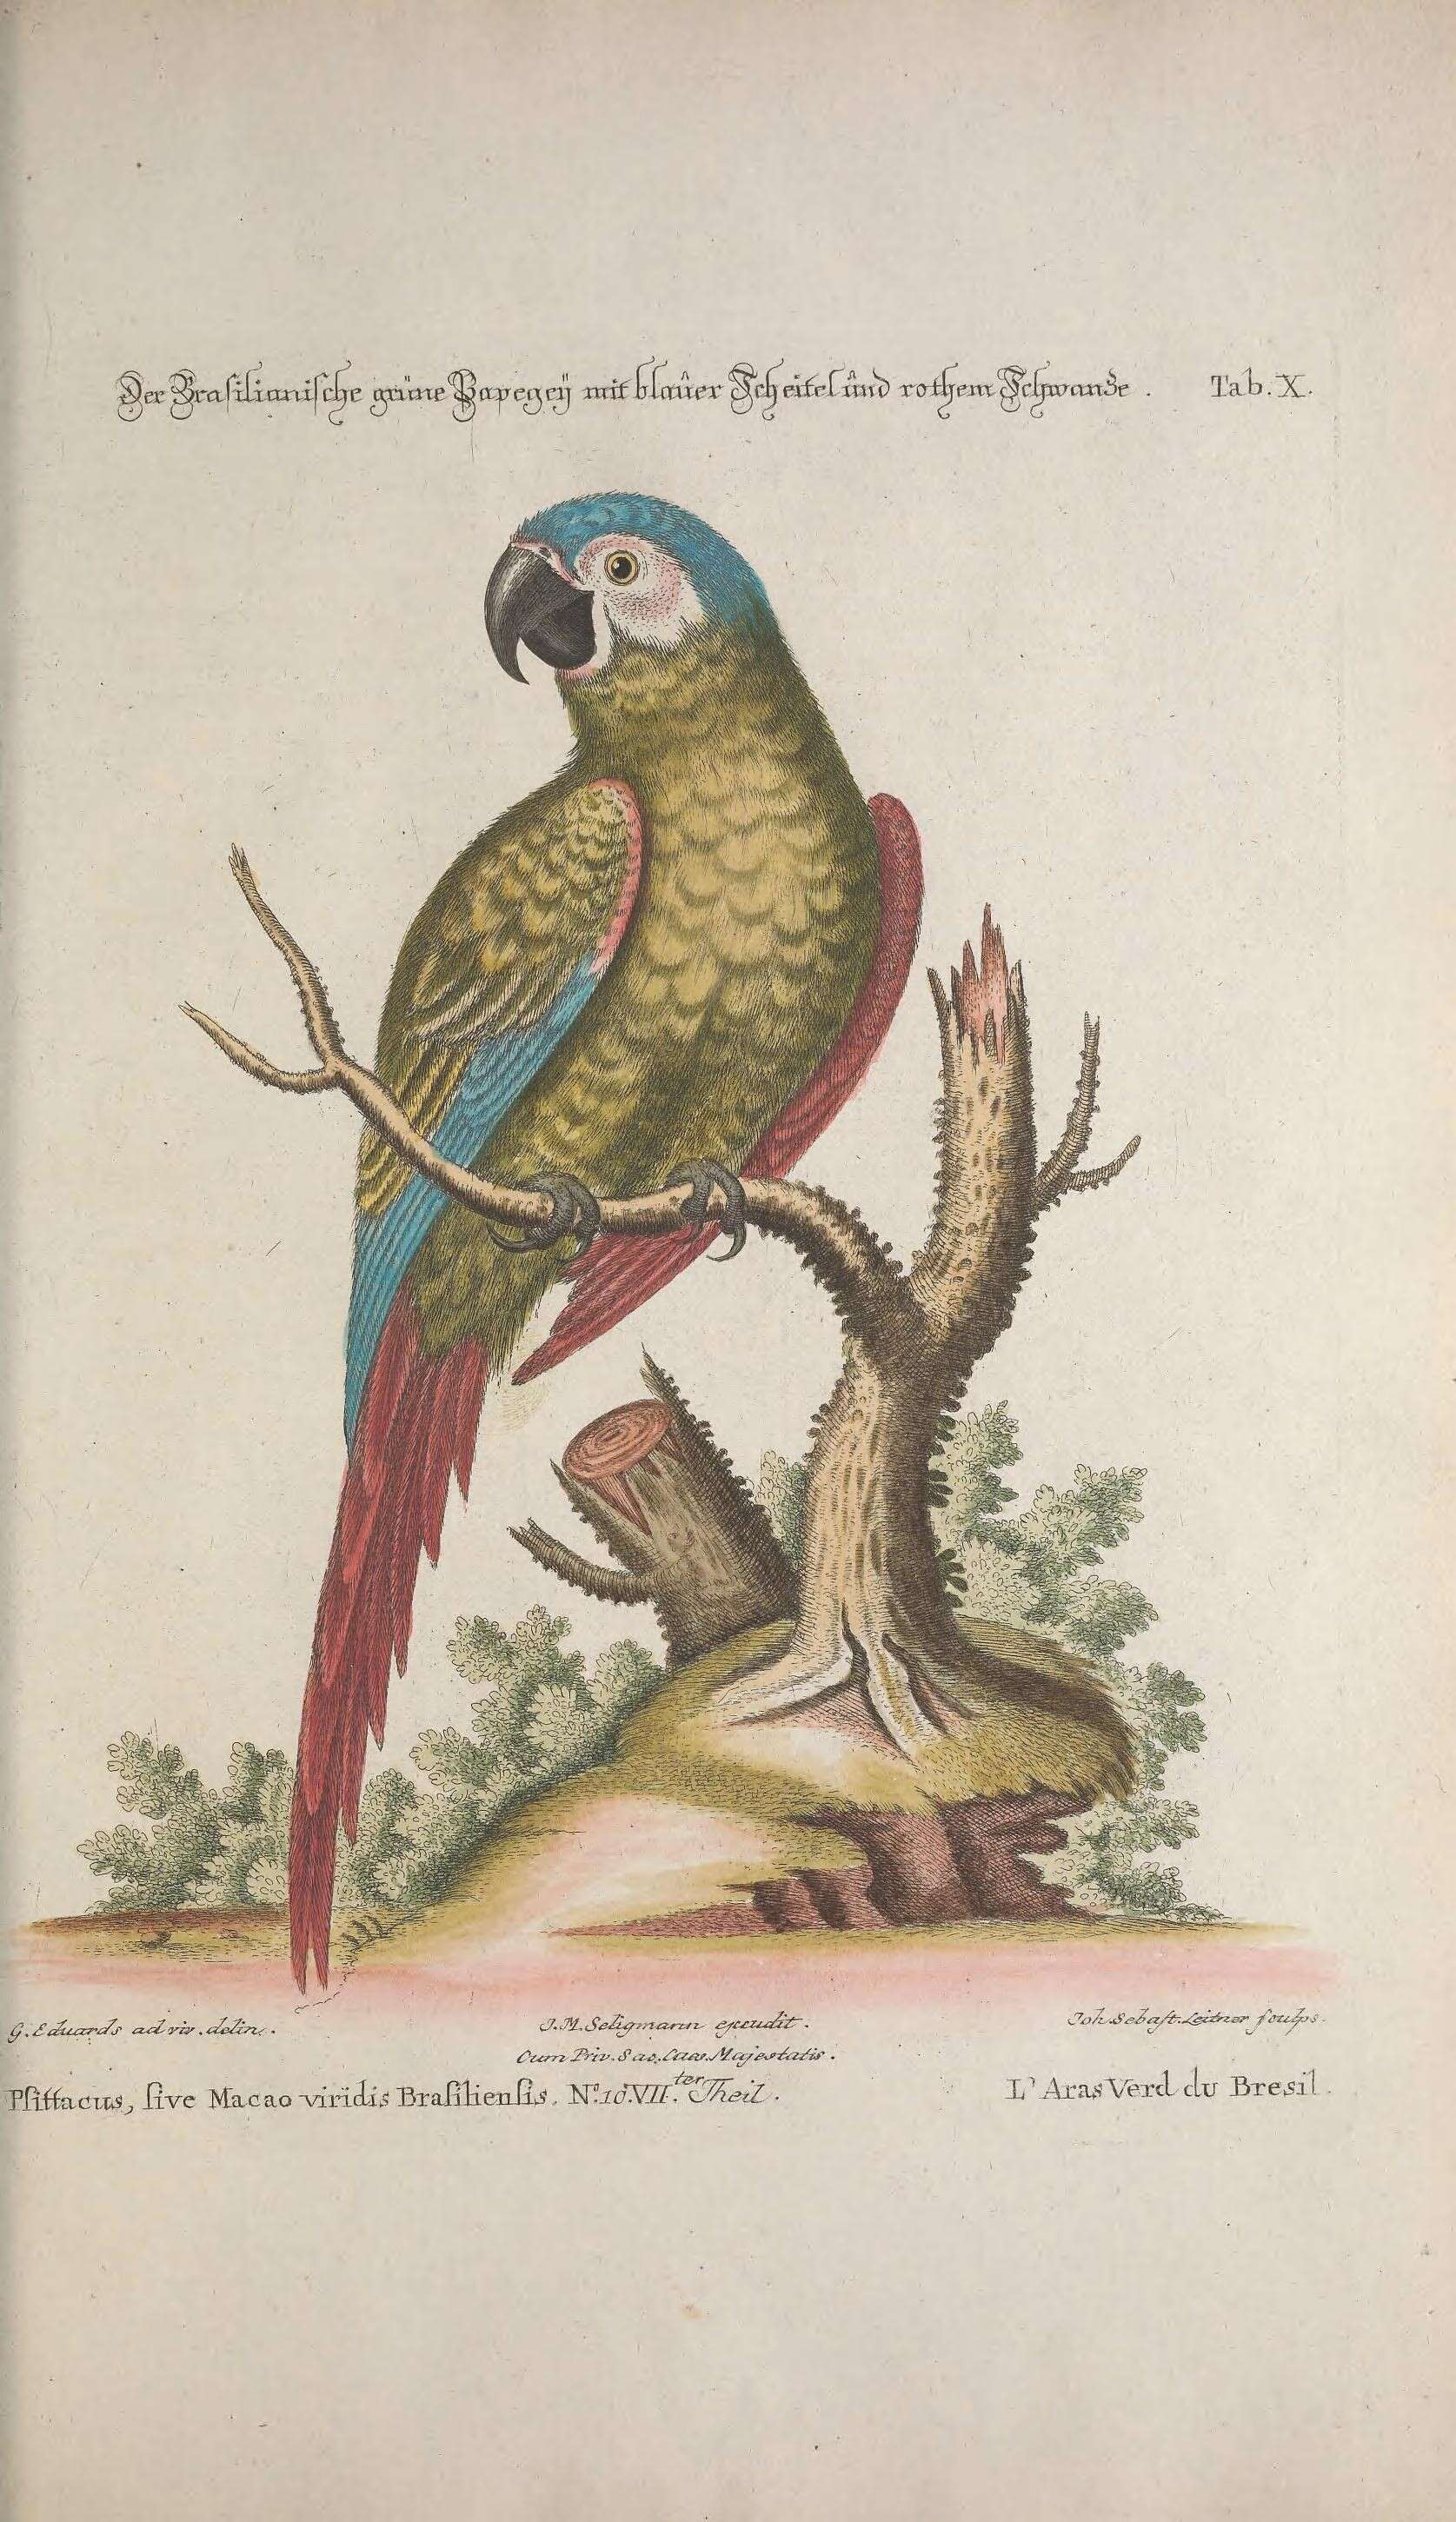 Image of Chestnut-fronted Macaw